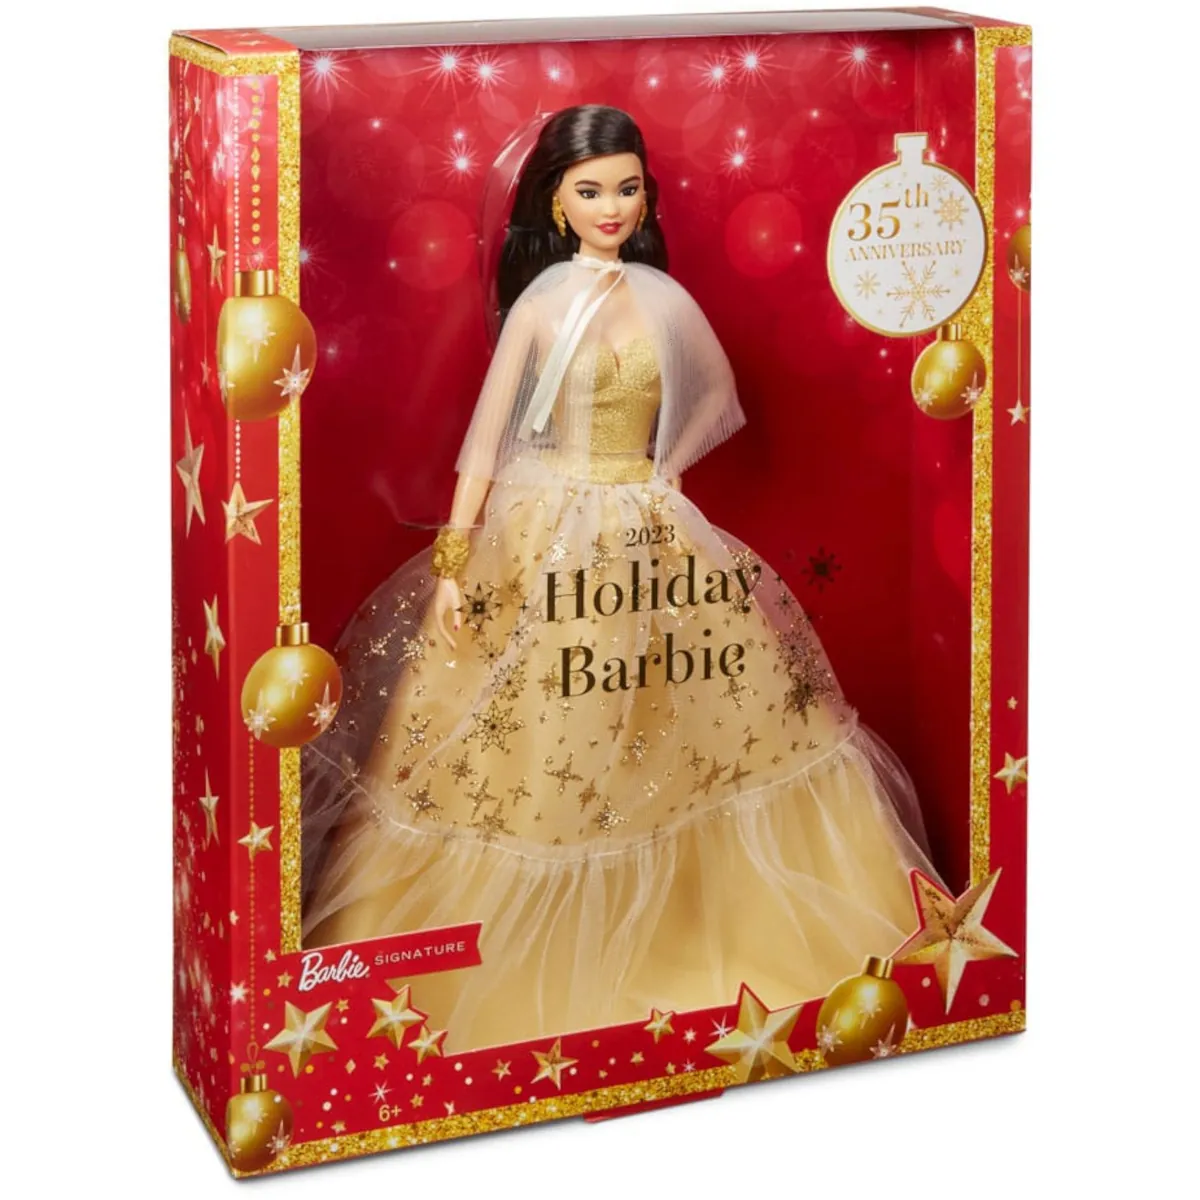 Barbie Signature Doll 35th Anniversary 2023 Holiday Doll Barbie 4 Box Side